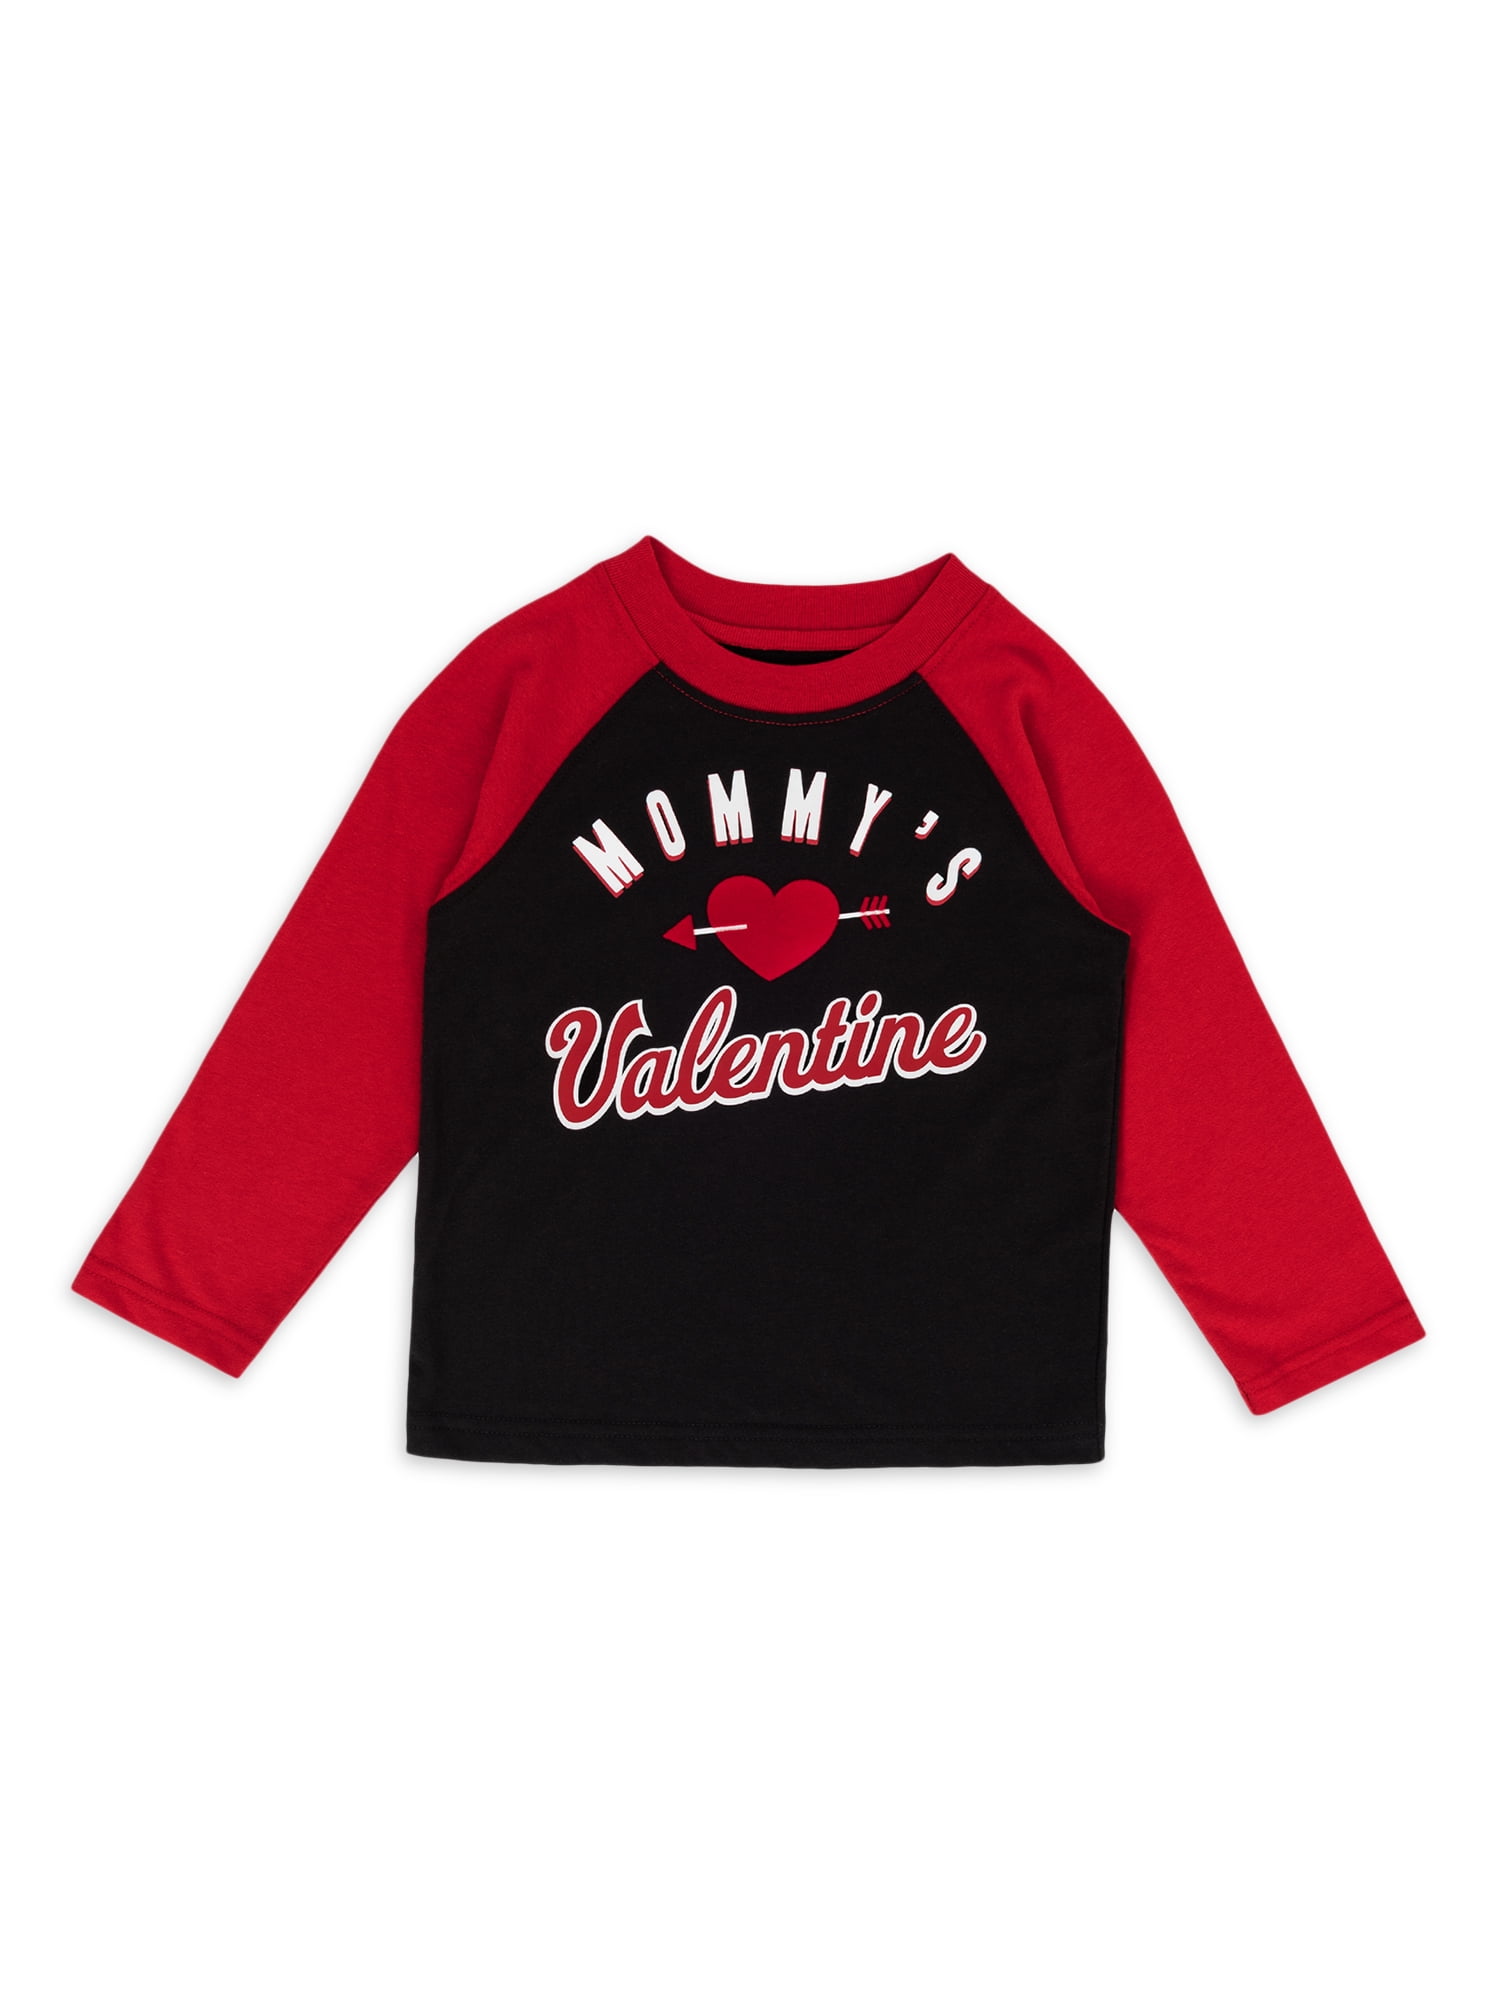 Clothing, Shoes & Accessories Baby Clothing, Shoes & Accessories Red  Cupid's Wingman Boys Valentine's Day Tee Shirt Size 3T Way To Celebrate  RA4741049